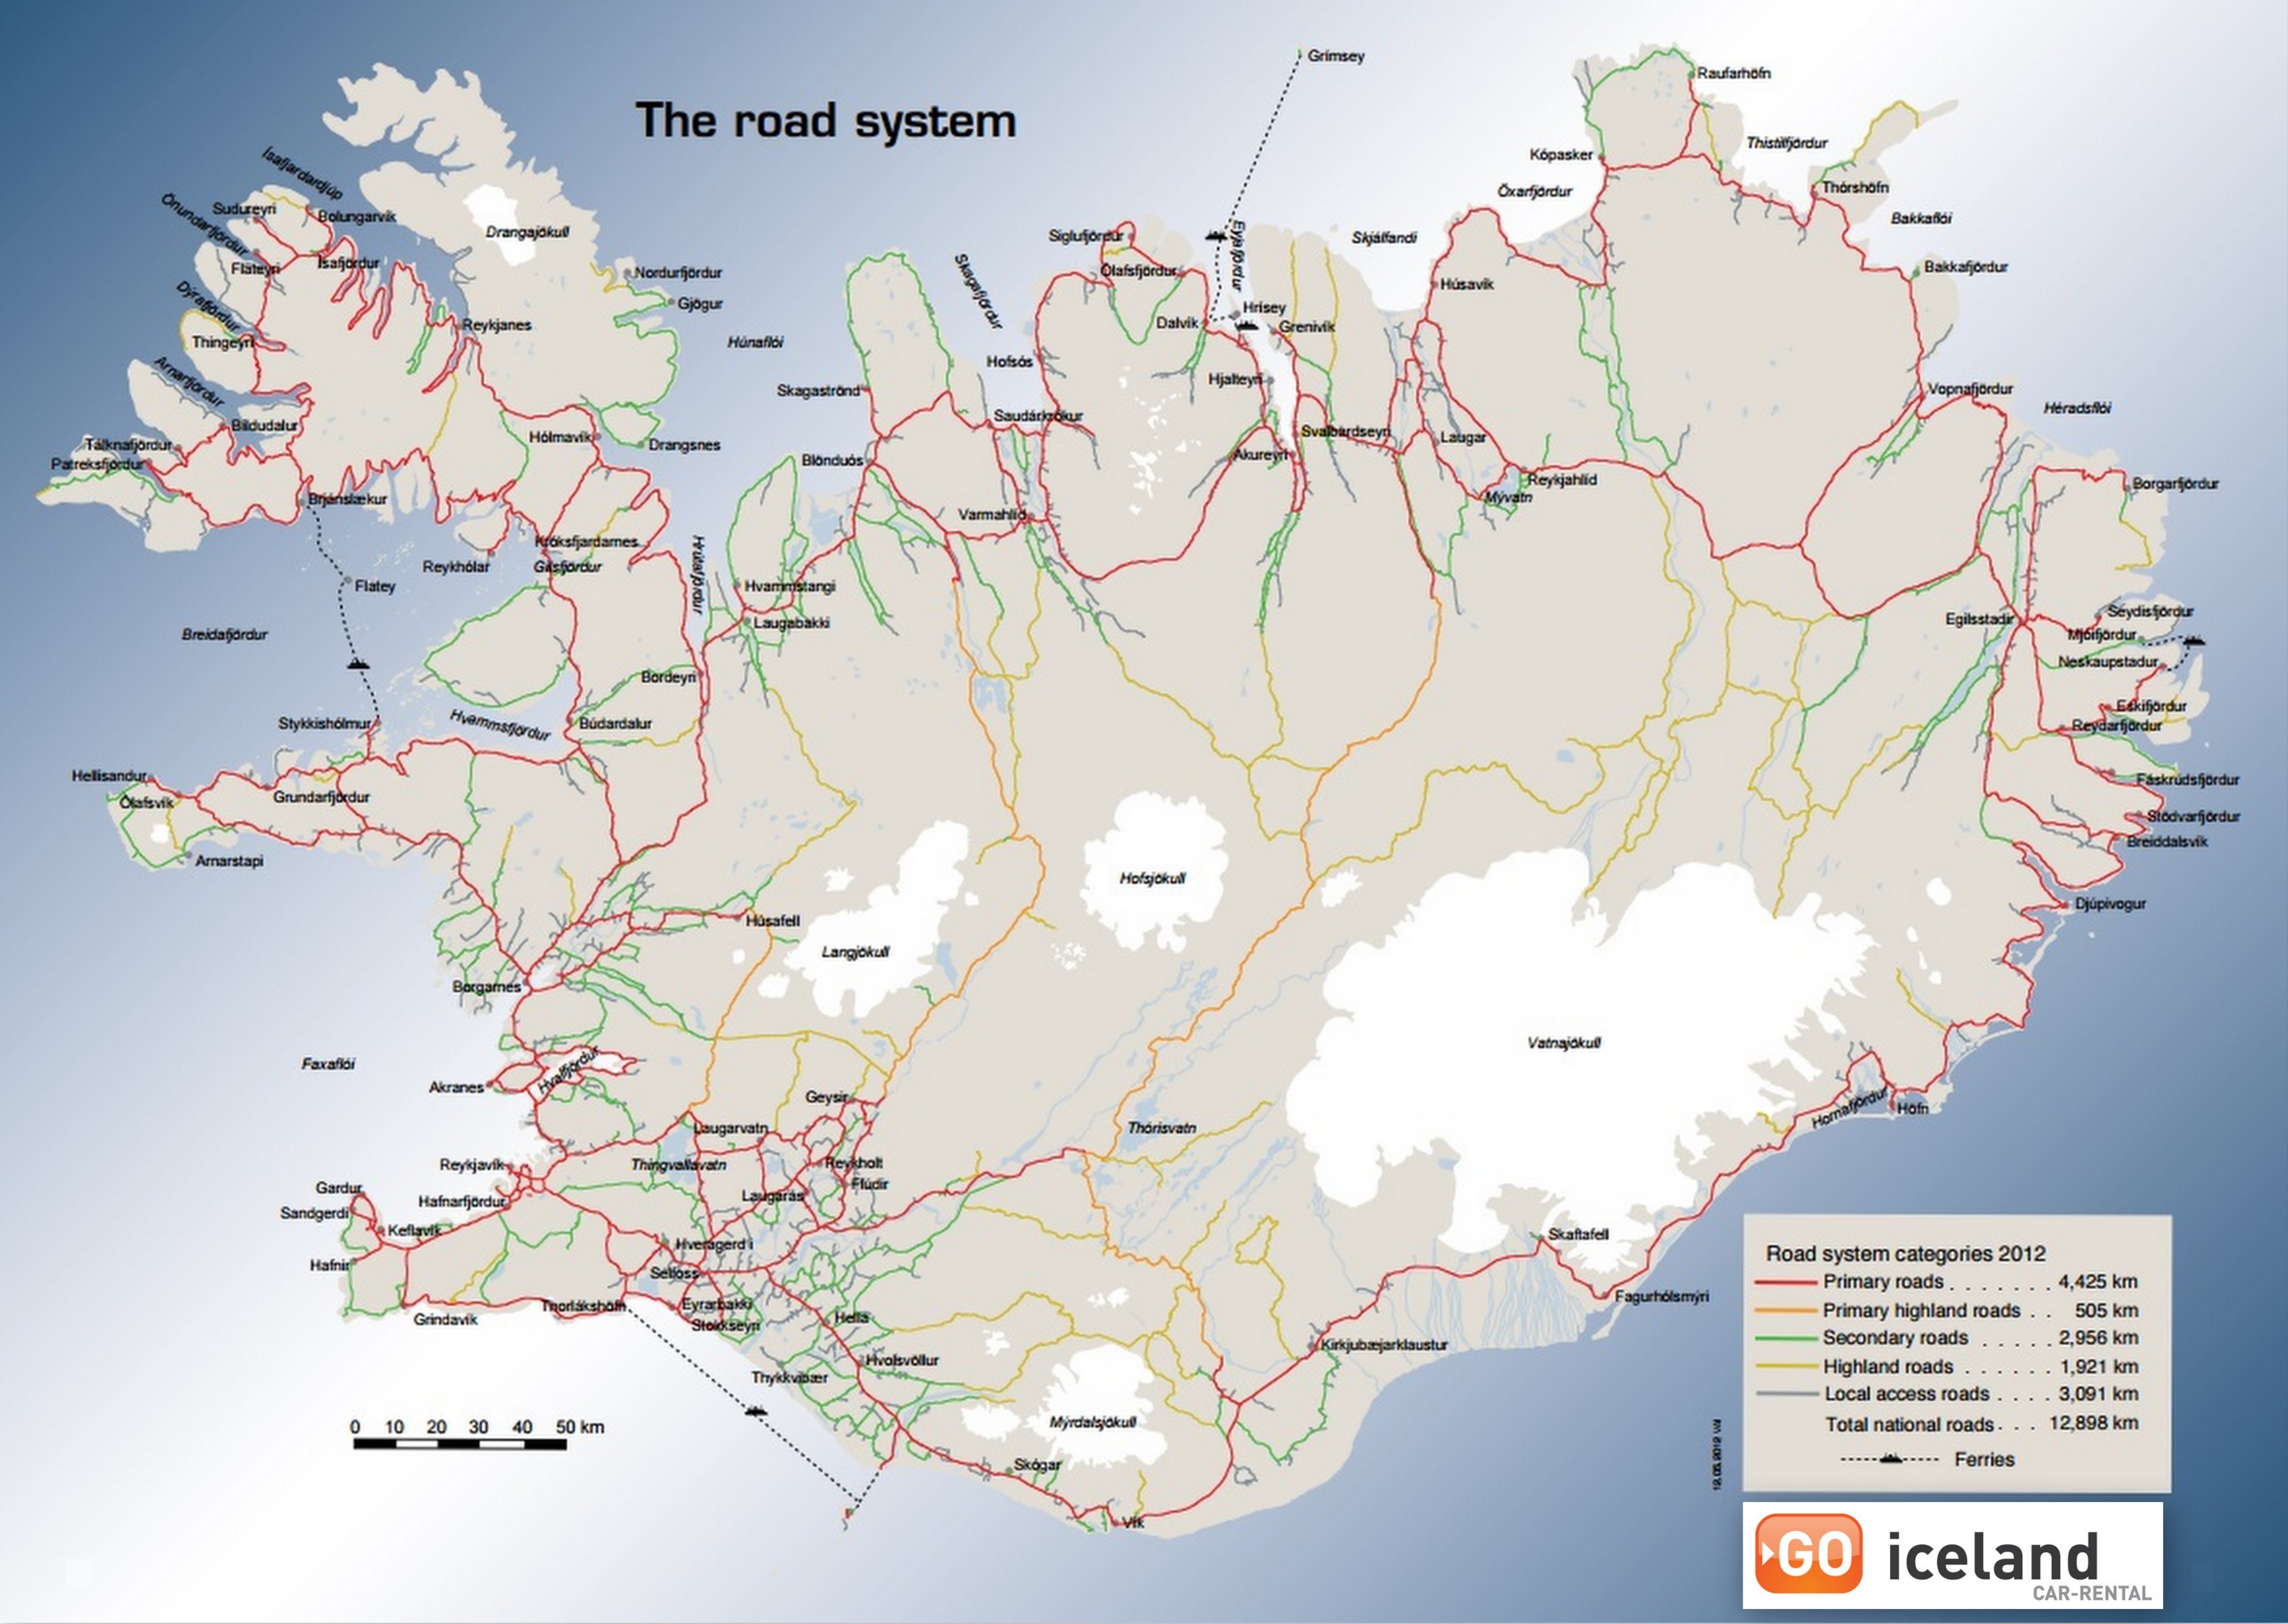 The Icelandic road system